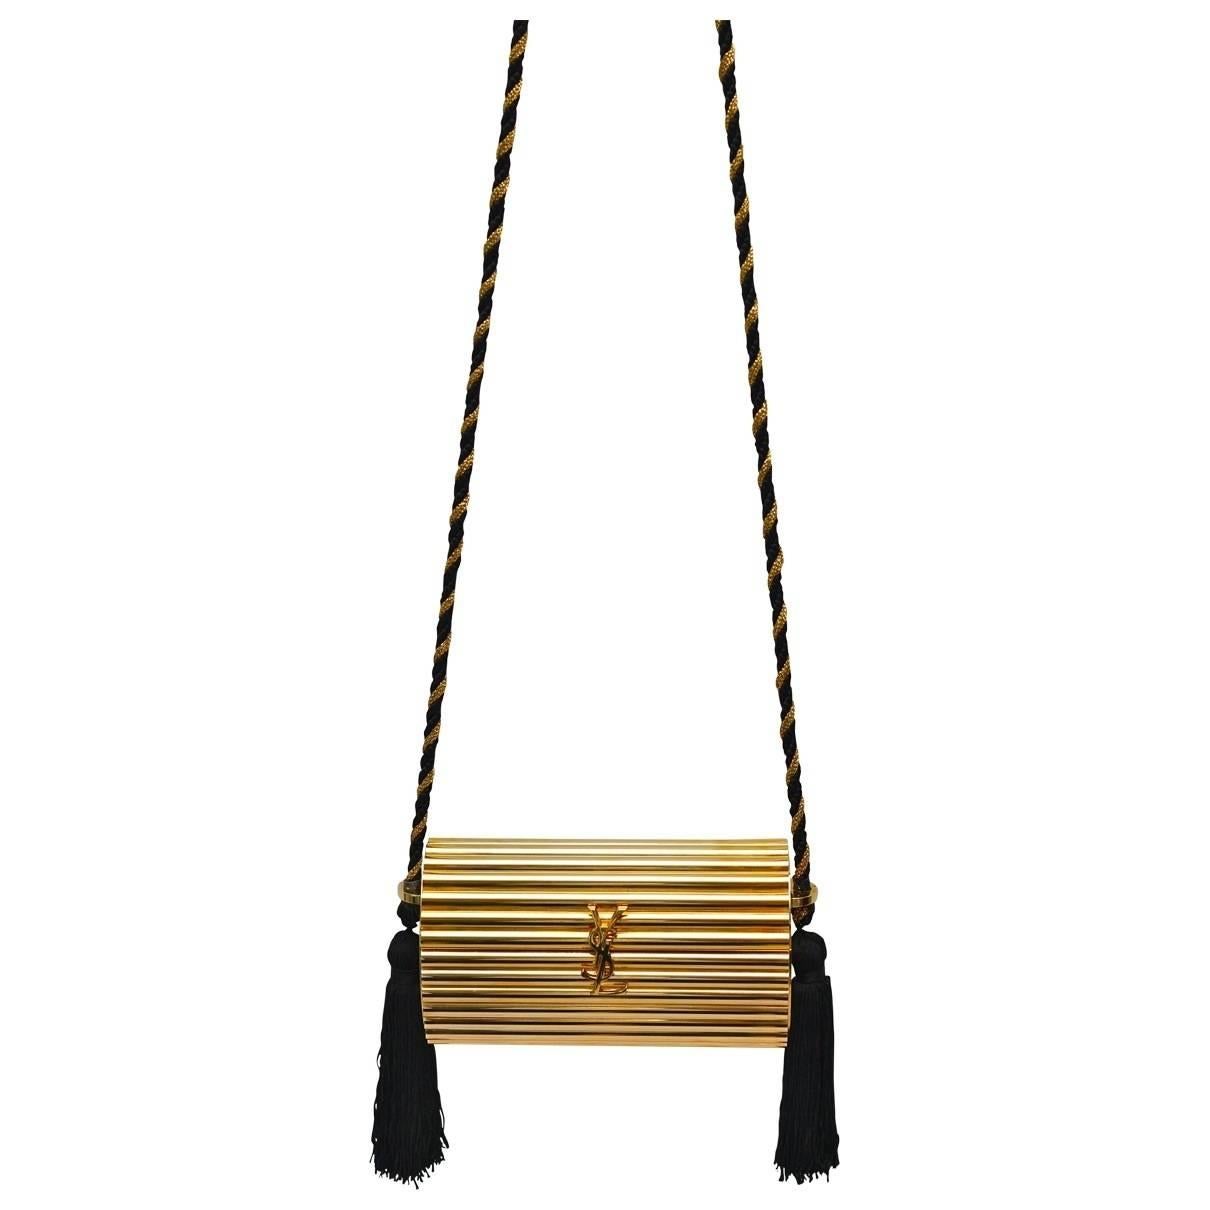 YVES SAINT LAURENT rare and collectable vintage gold tone ribbed minaudiere featuring :

- Hard box cylindric body.
- Large YSL logo at the front.
- Black and gold braided shoulder strap.
- Long black silk tassels.
- Gold canvas